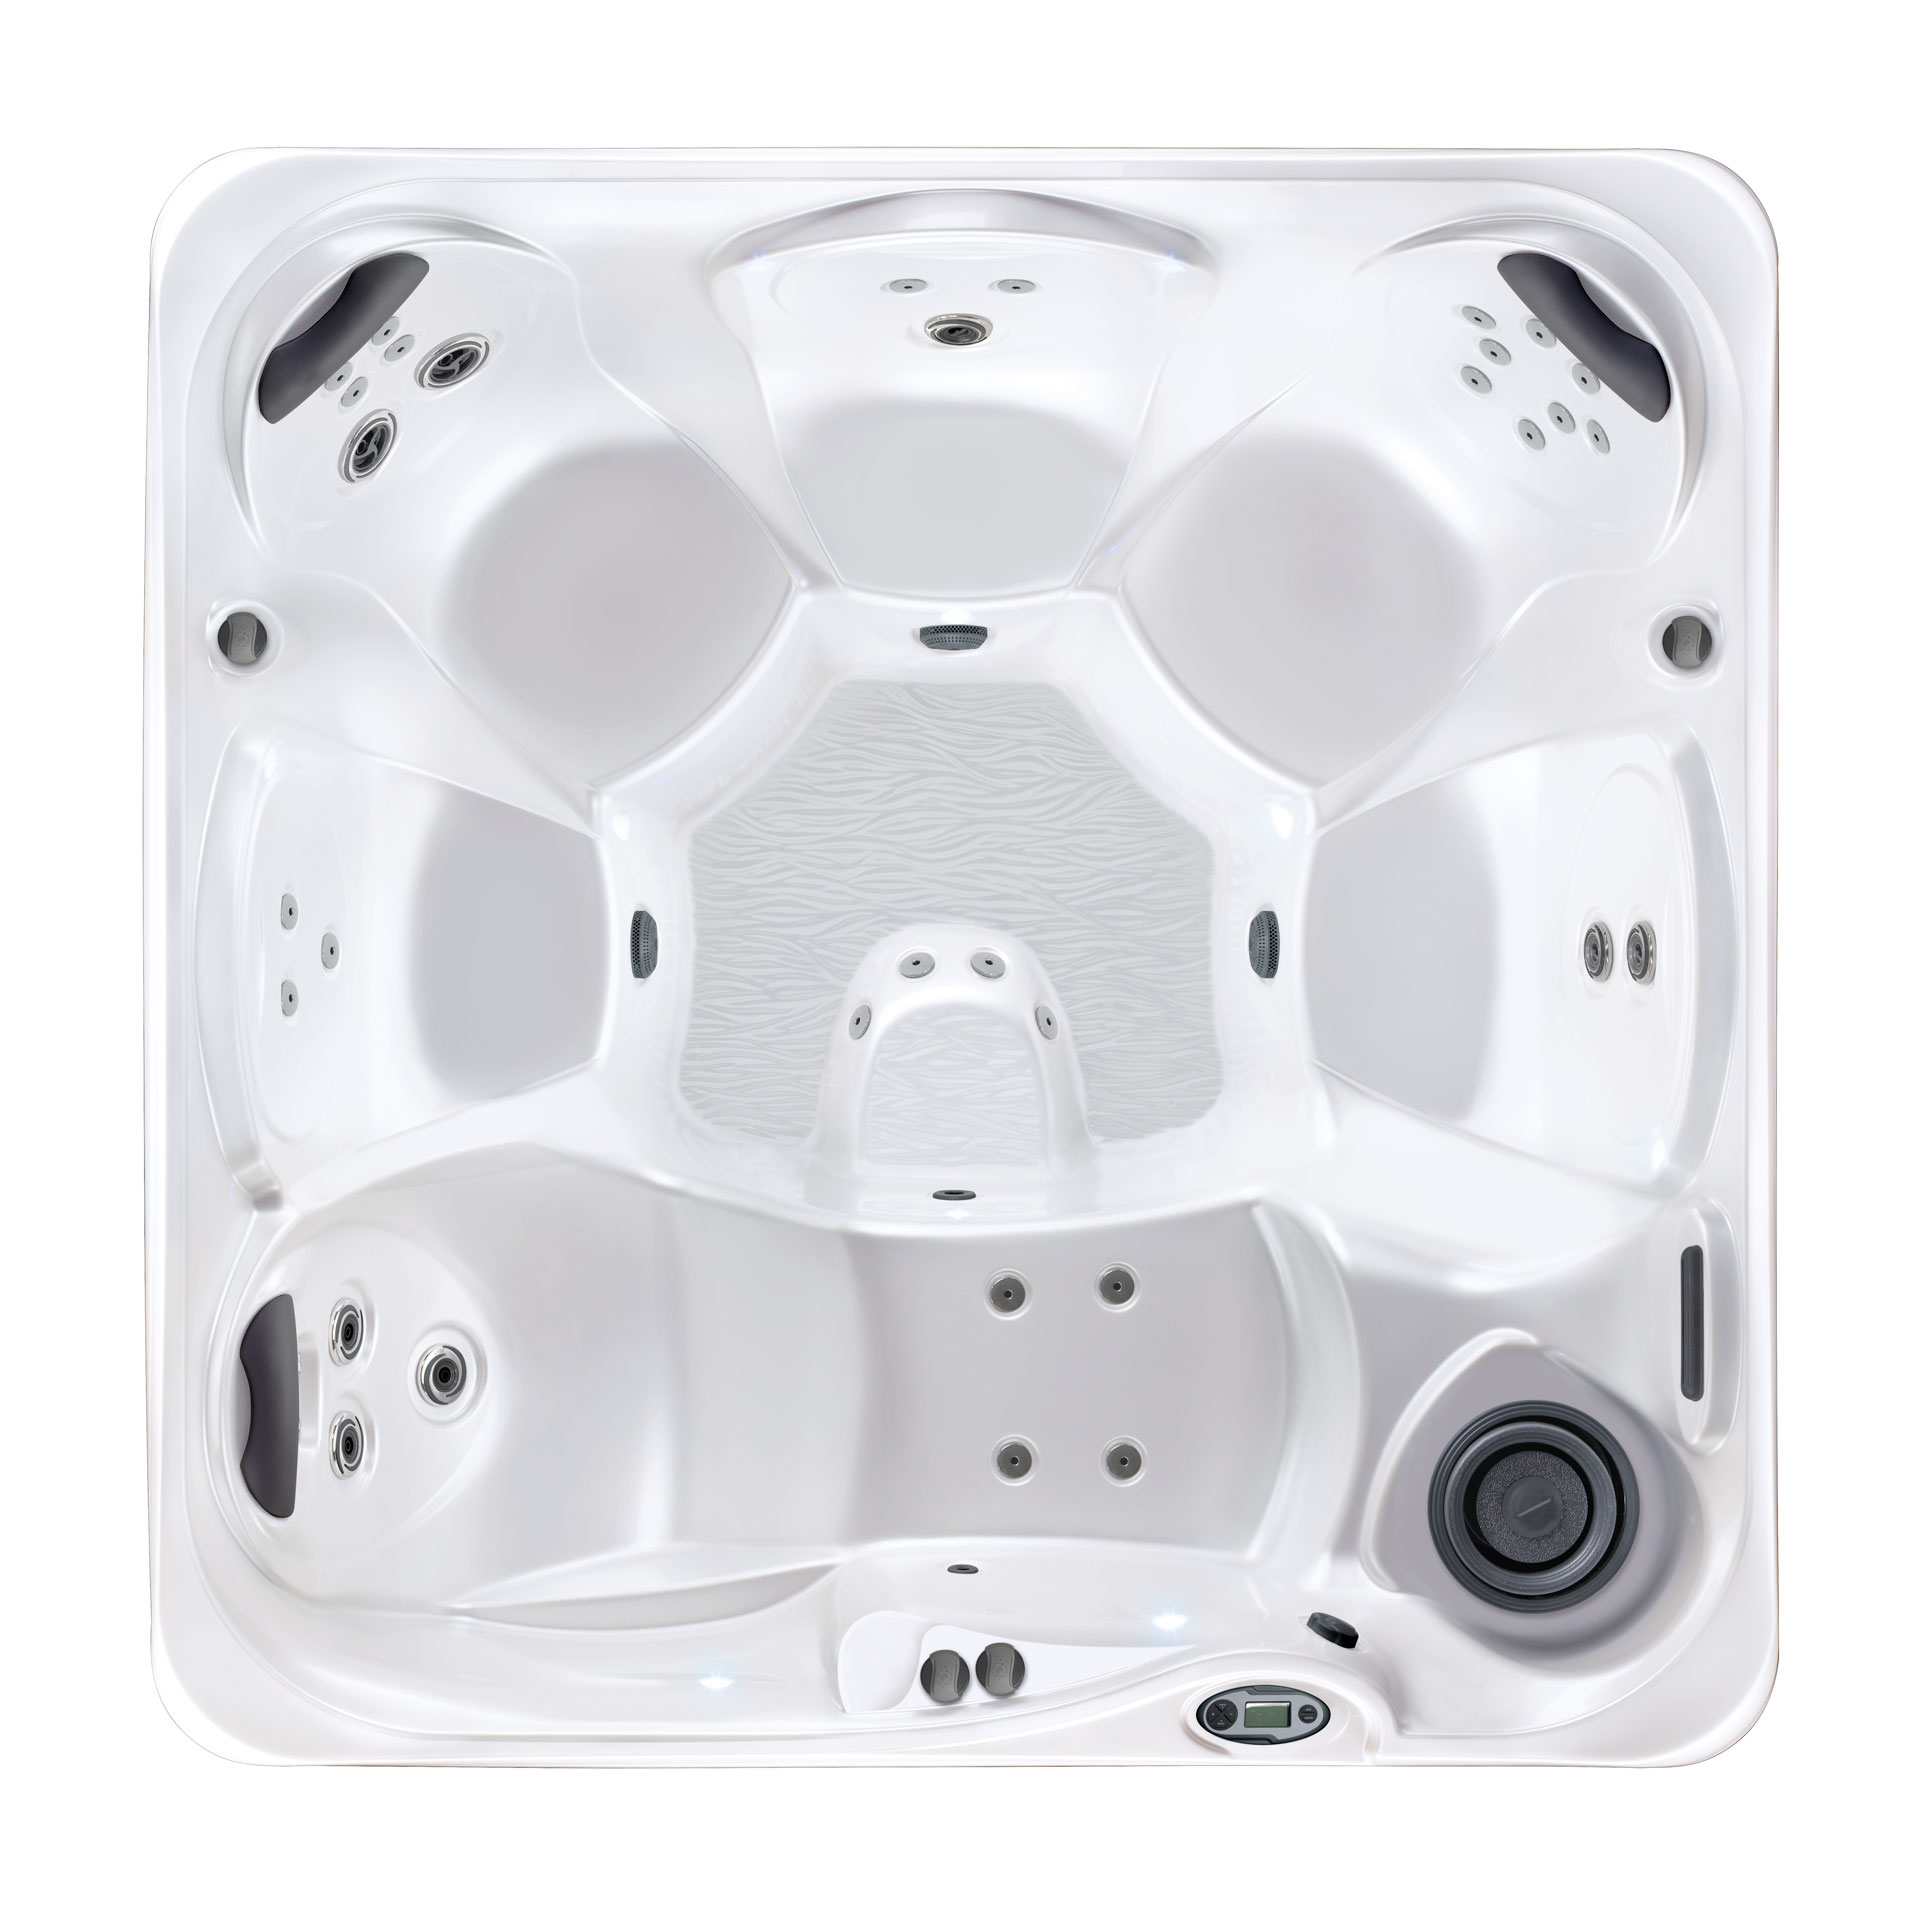 Watkins Wellness 735L 6-person hot tub with lounge seat